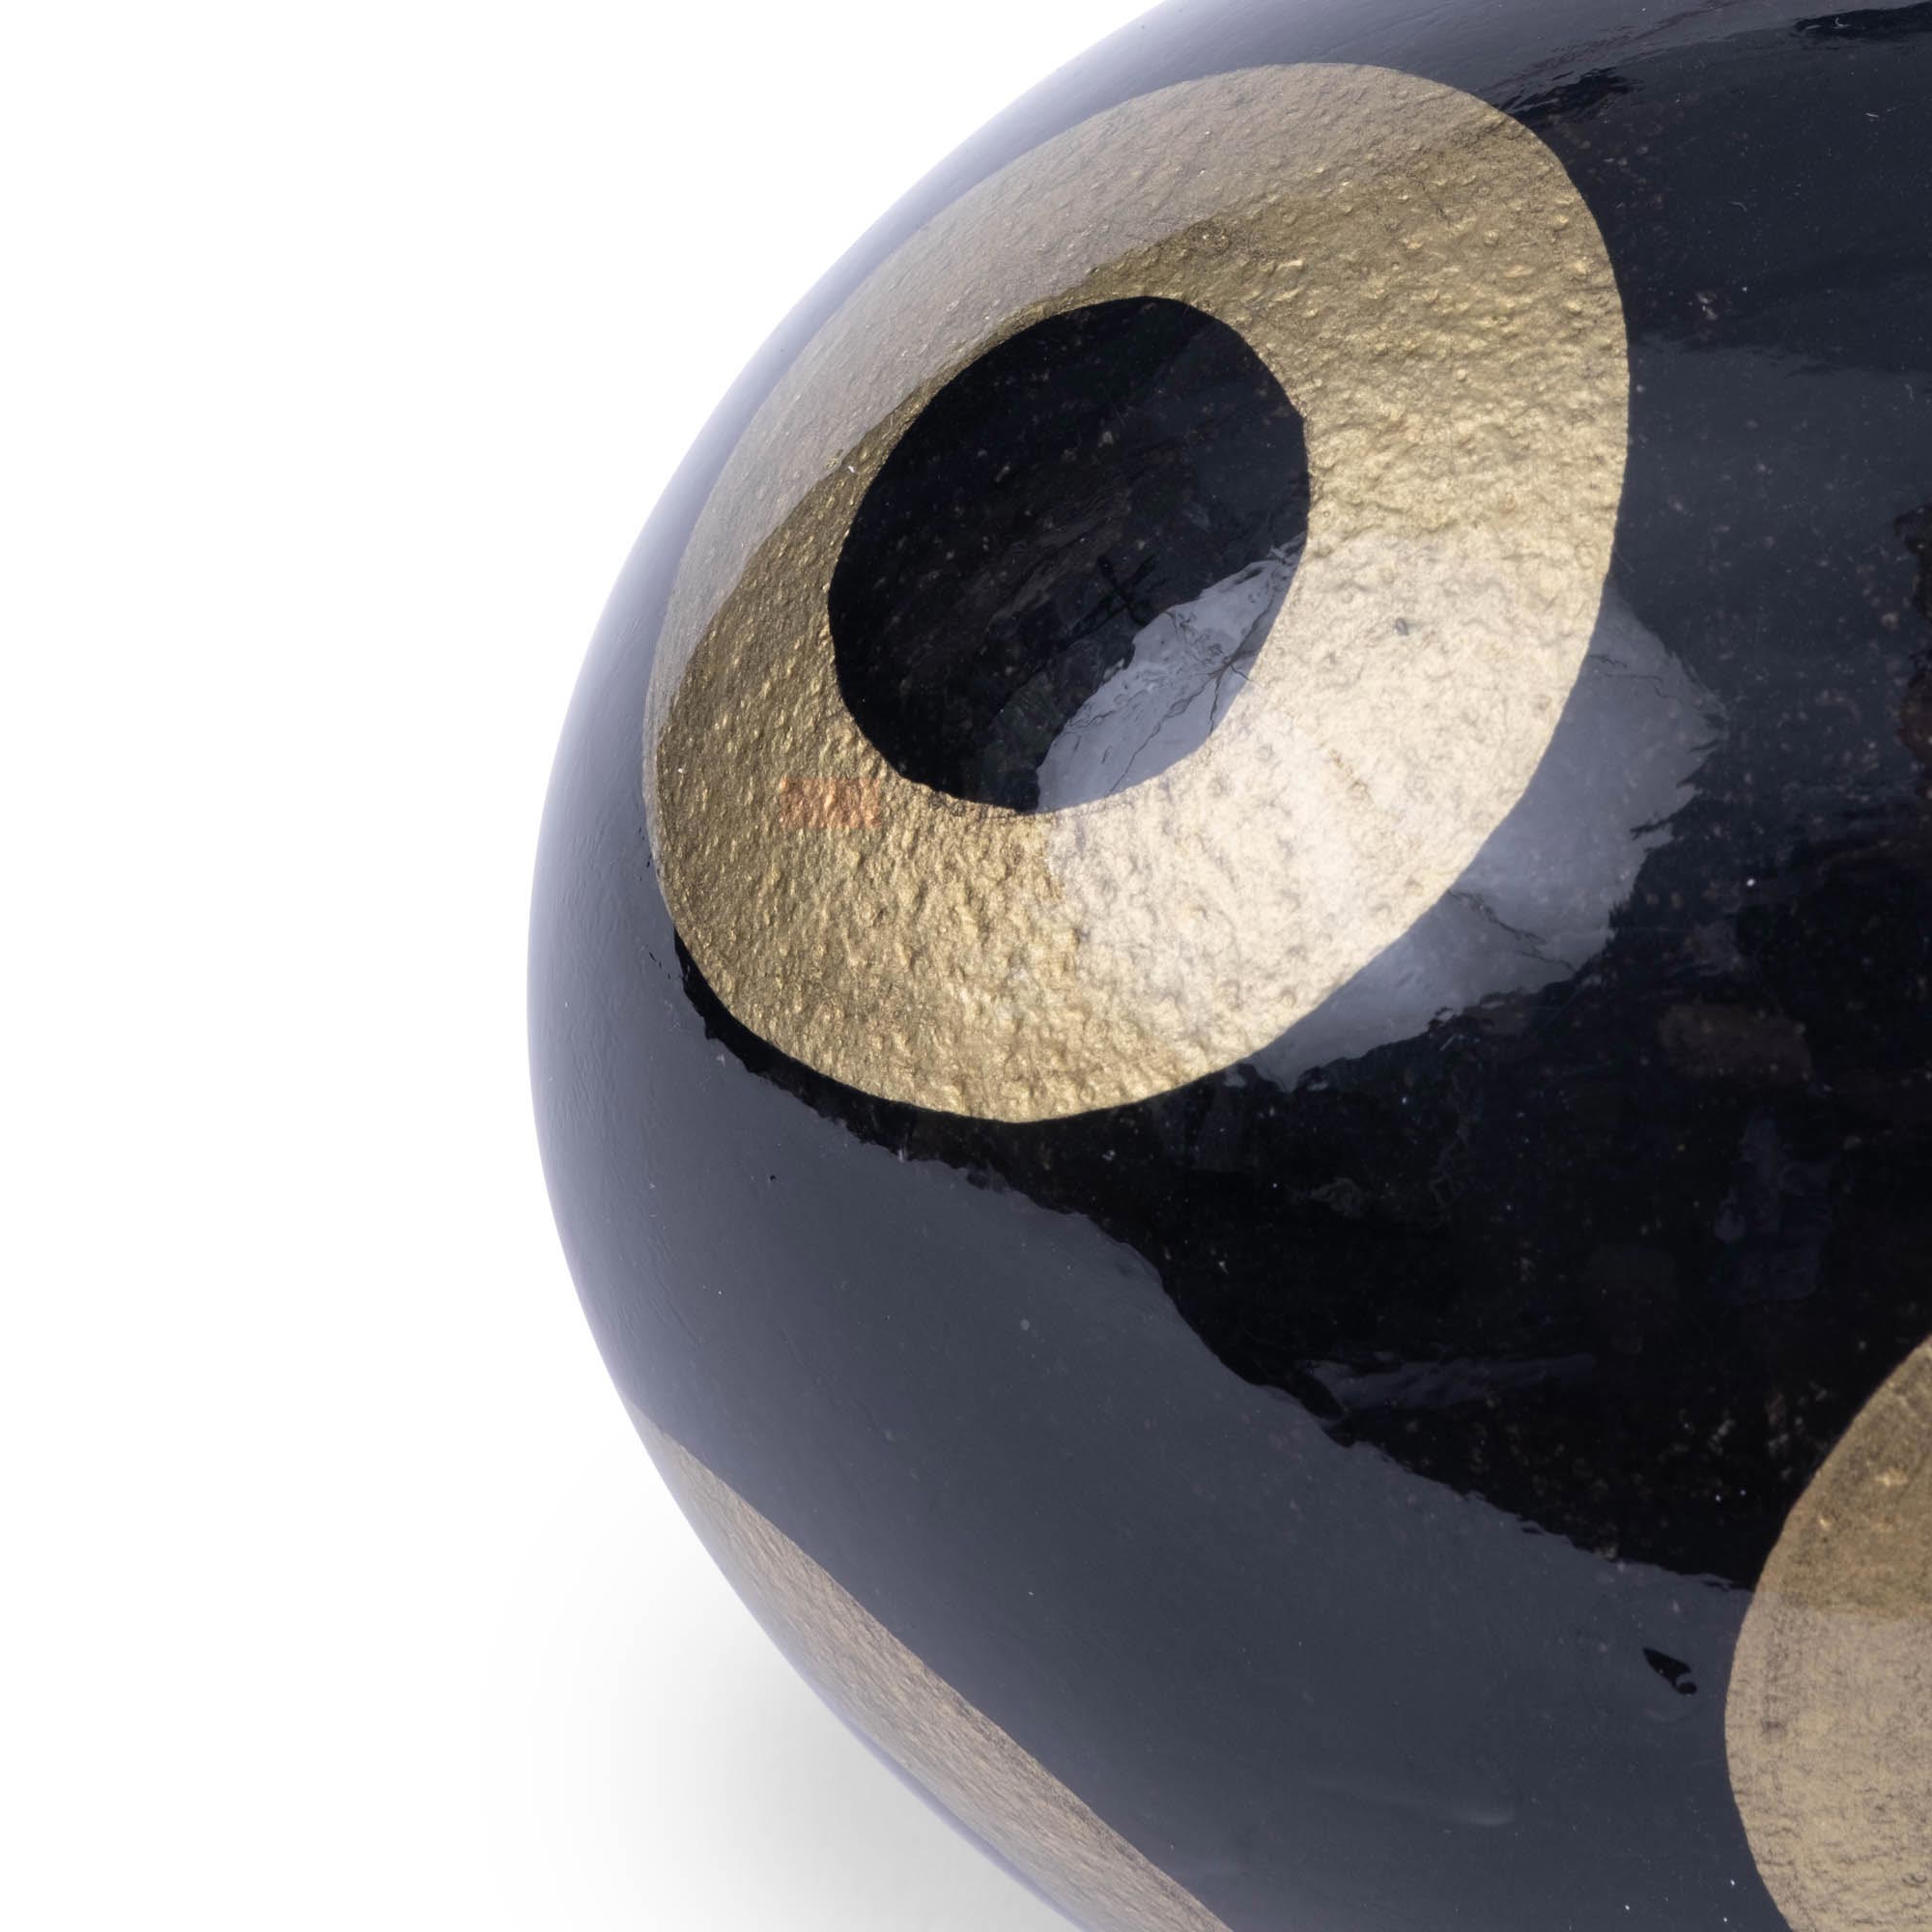 Painted Ostrich Egg - Black & Gold Circles